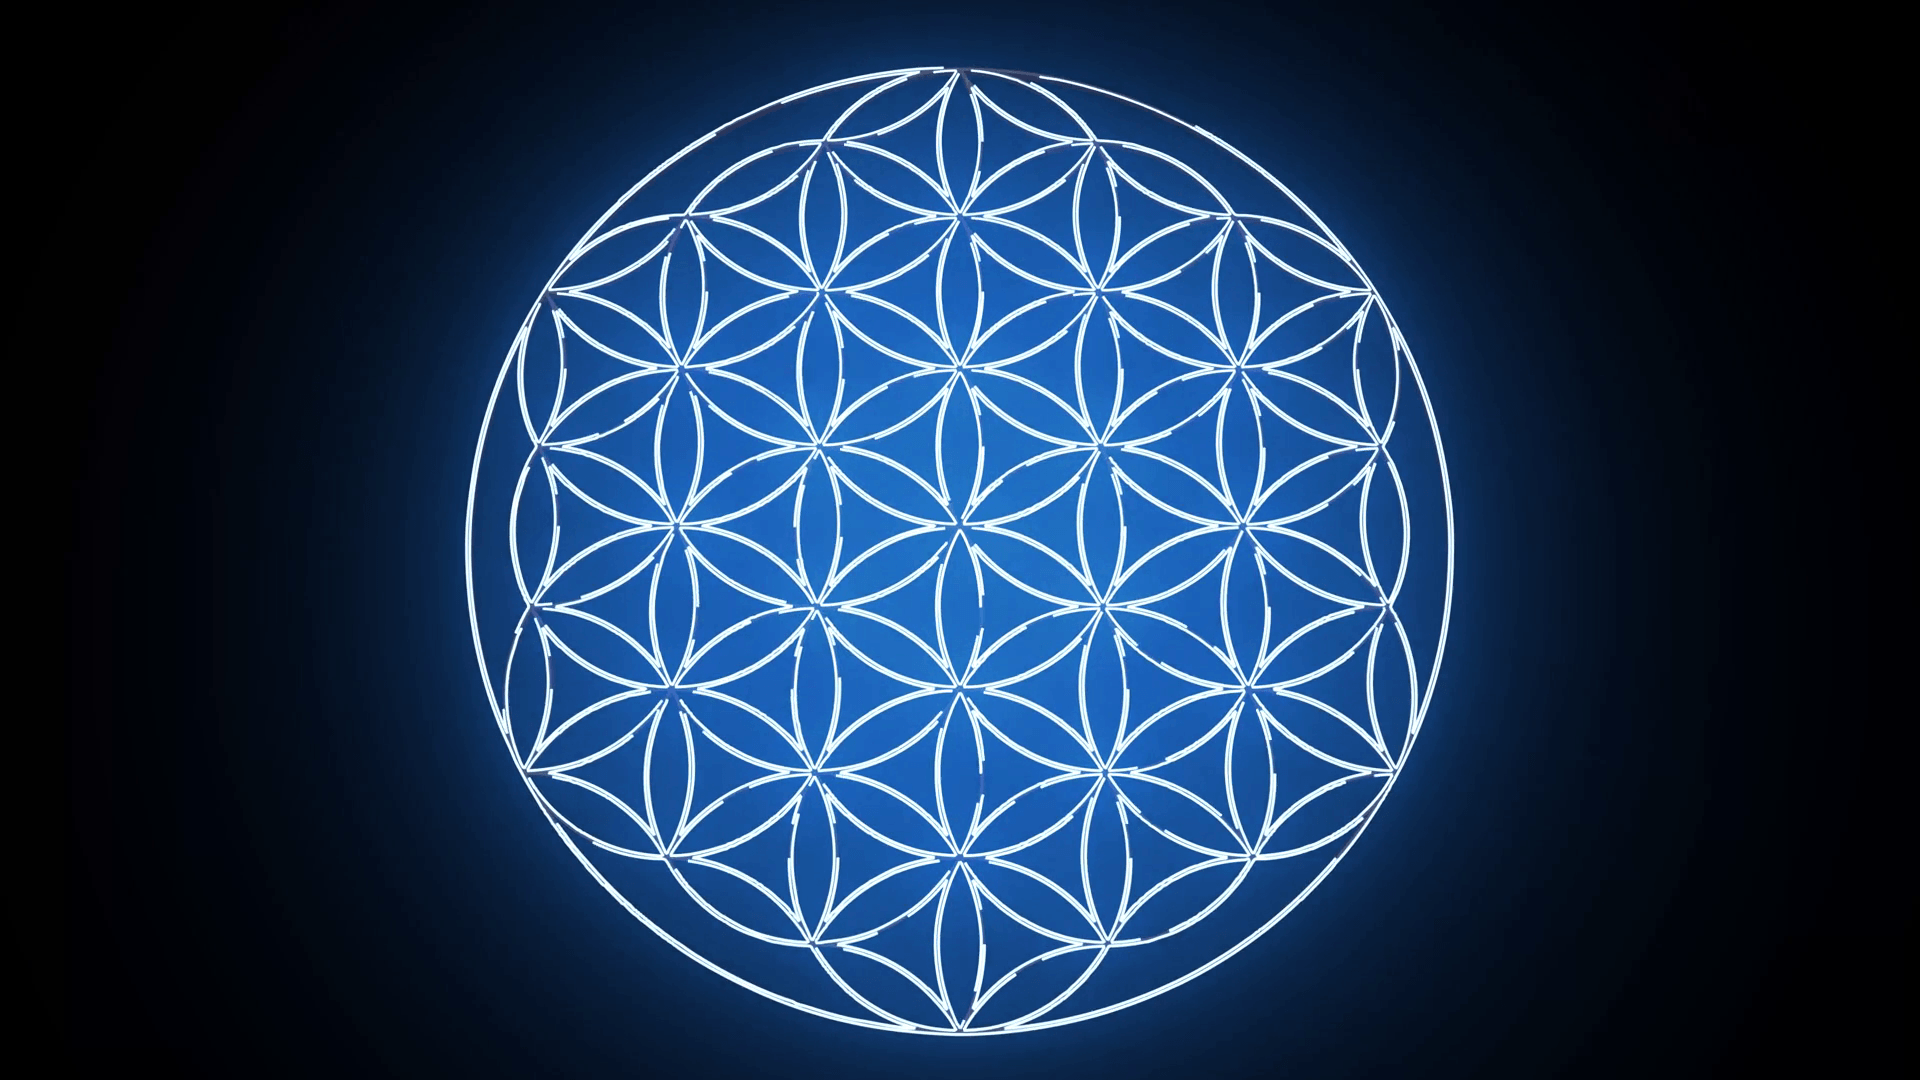 Flower Of Life Wallpapers Top Free Flower Of Life Backgrounds Wallpaperaccess